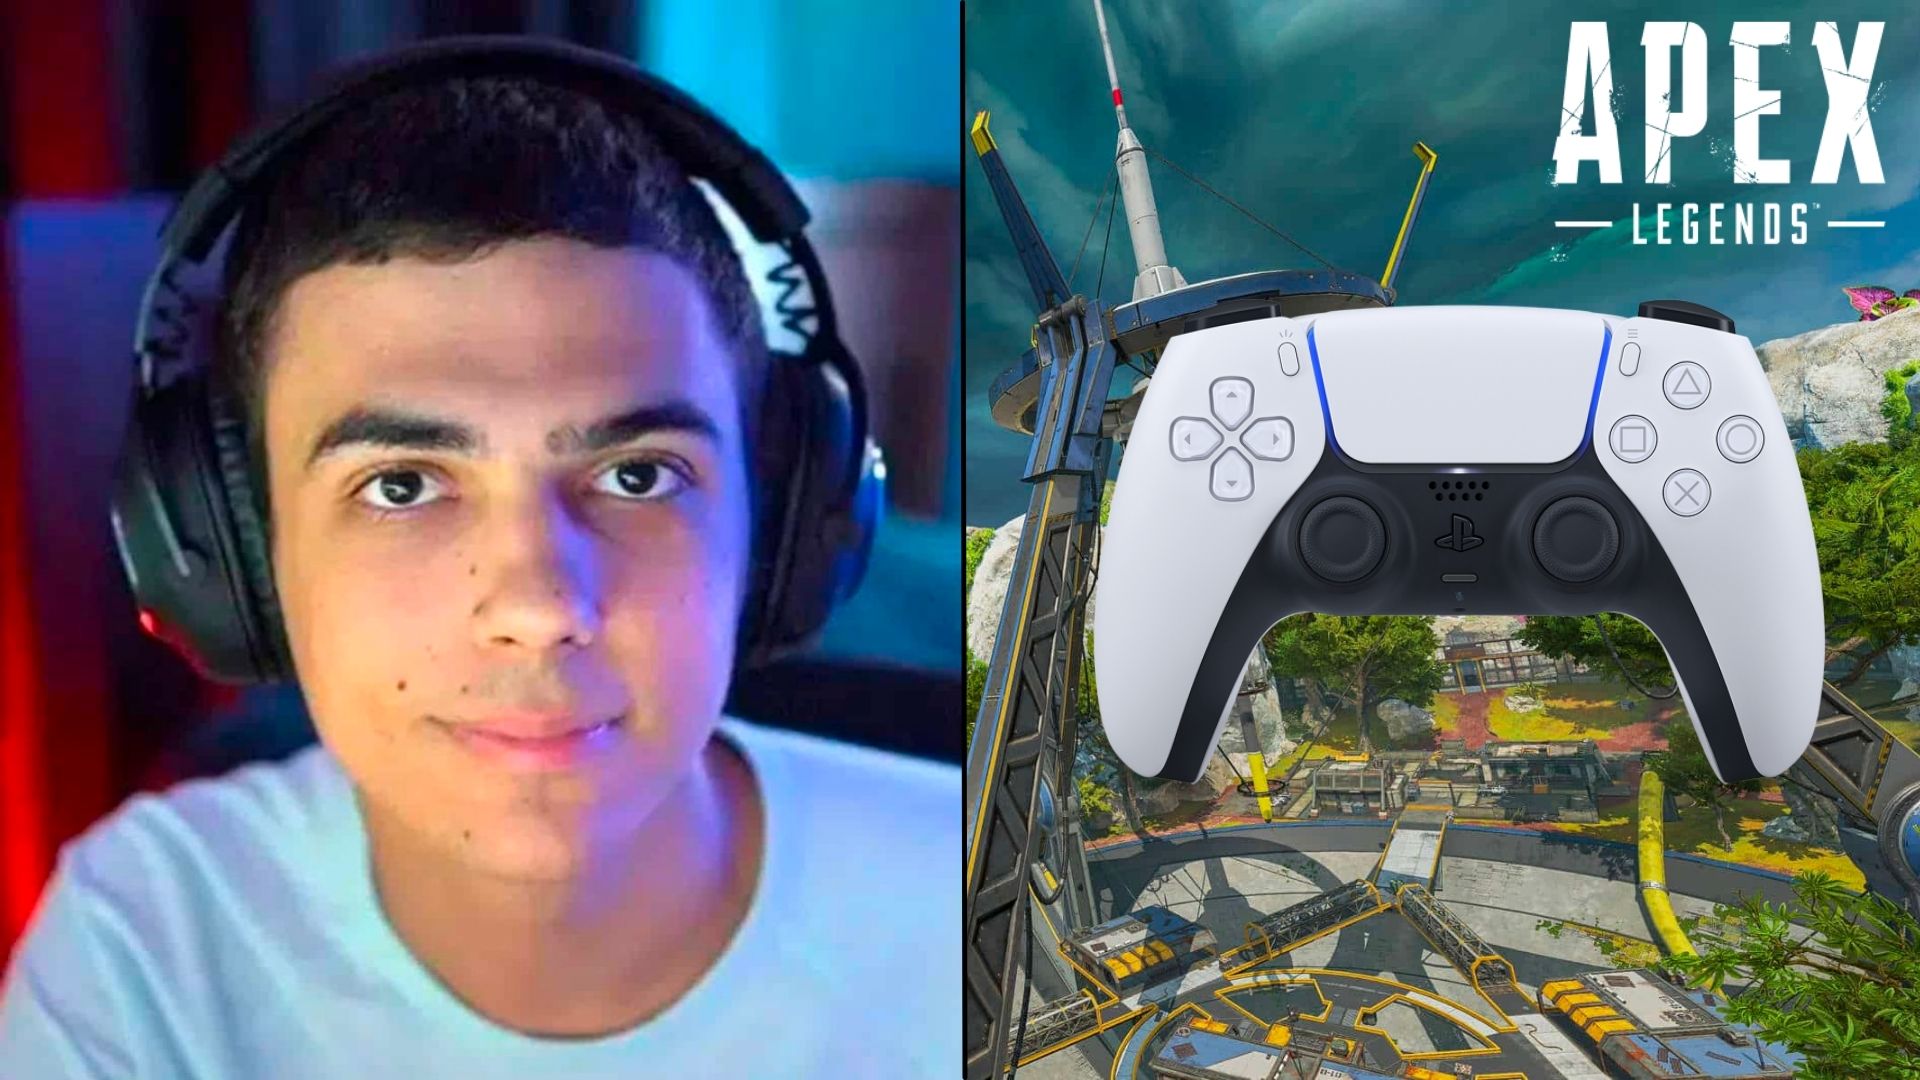 ImperialHal claims PS5 controller is “way better” in Apex Legends but he can’t use it – Dexerto